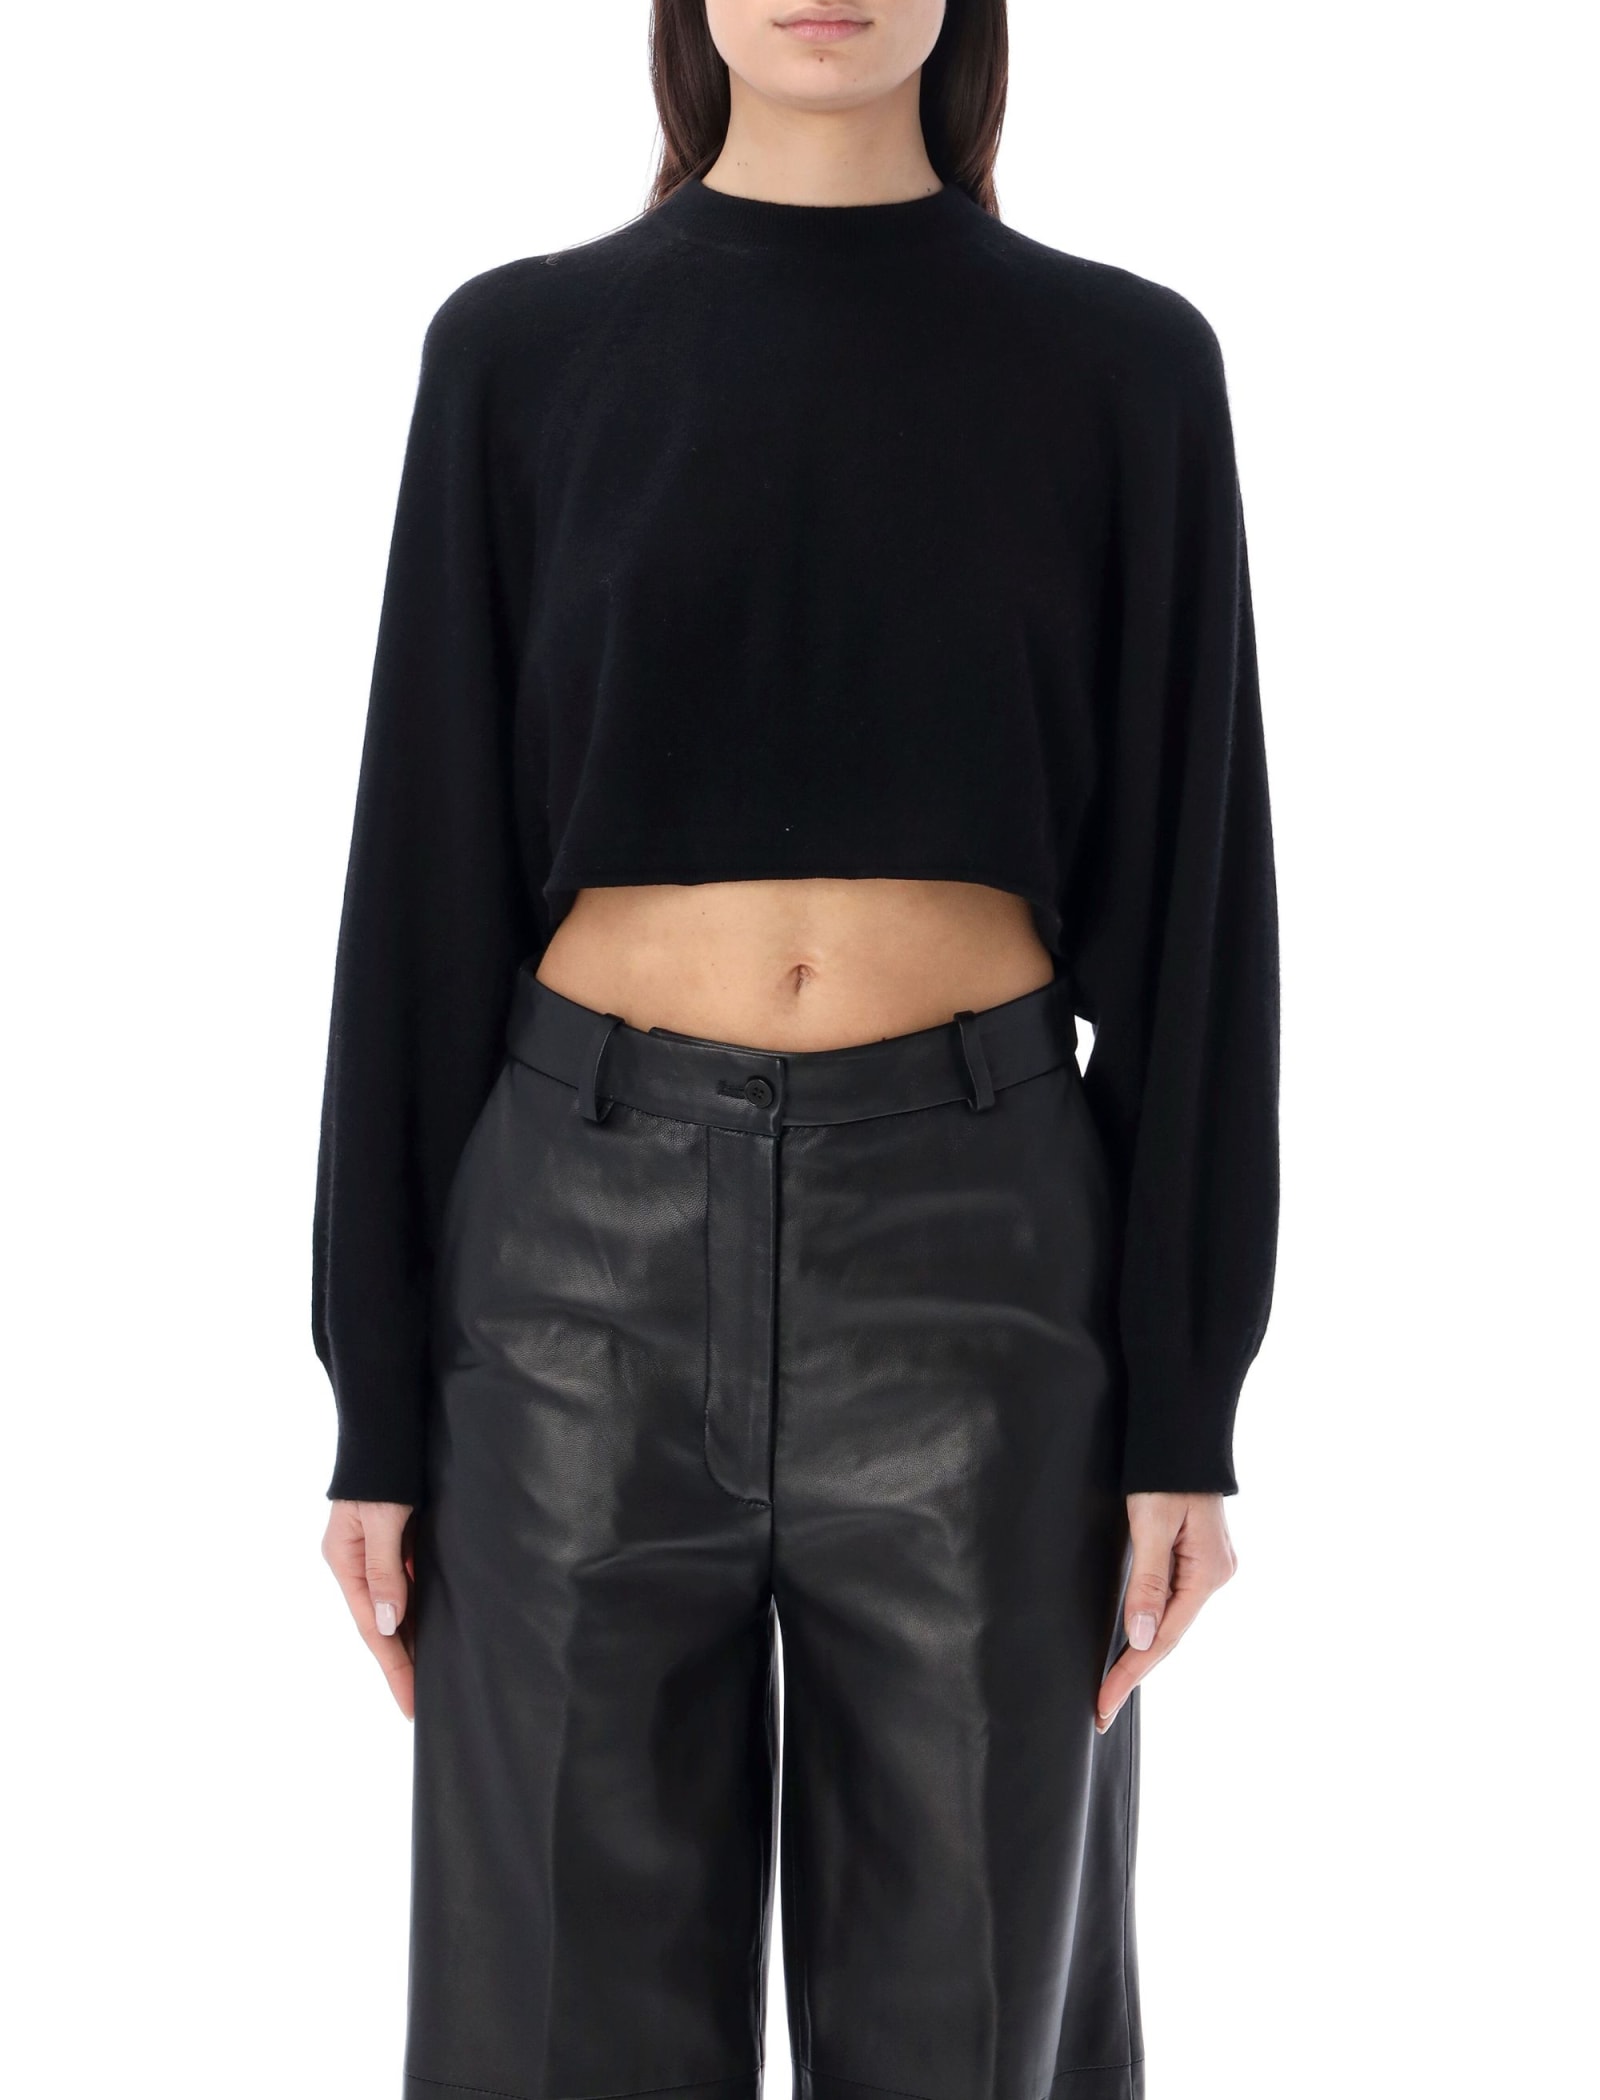 LOULOU STUDIO BOCAS CROPPED SWEATER